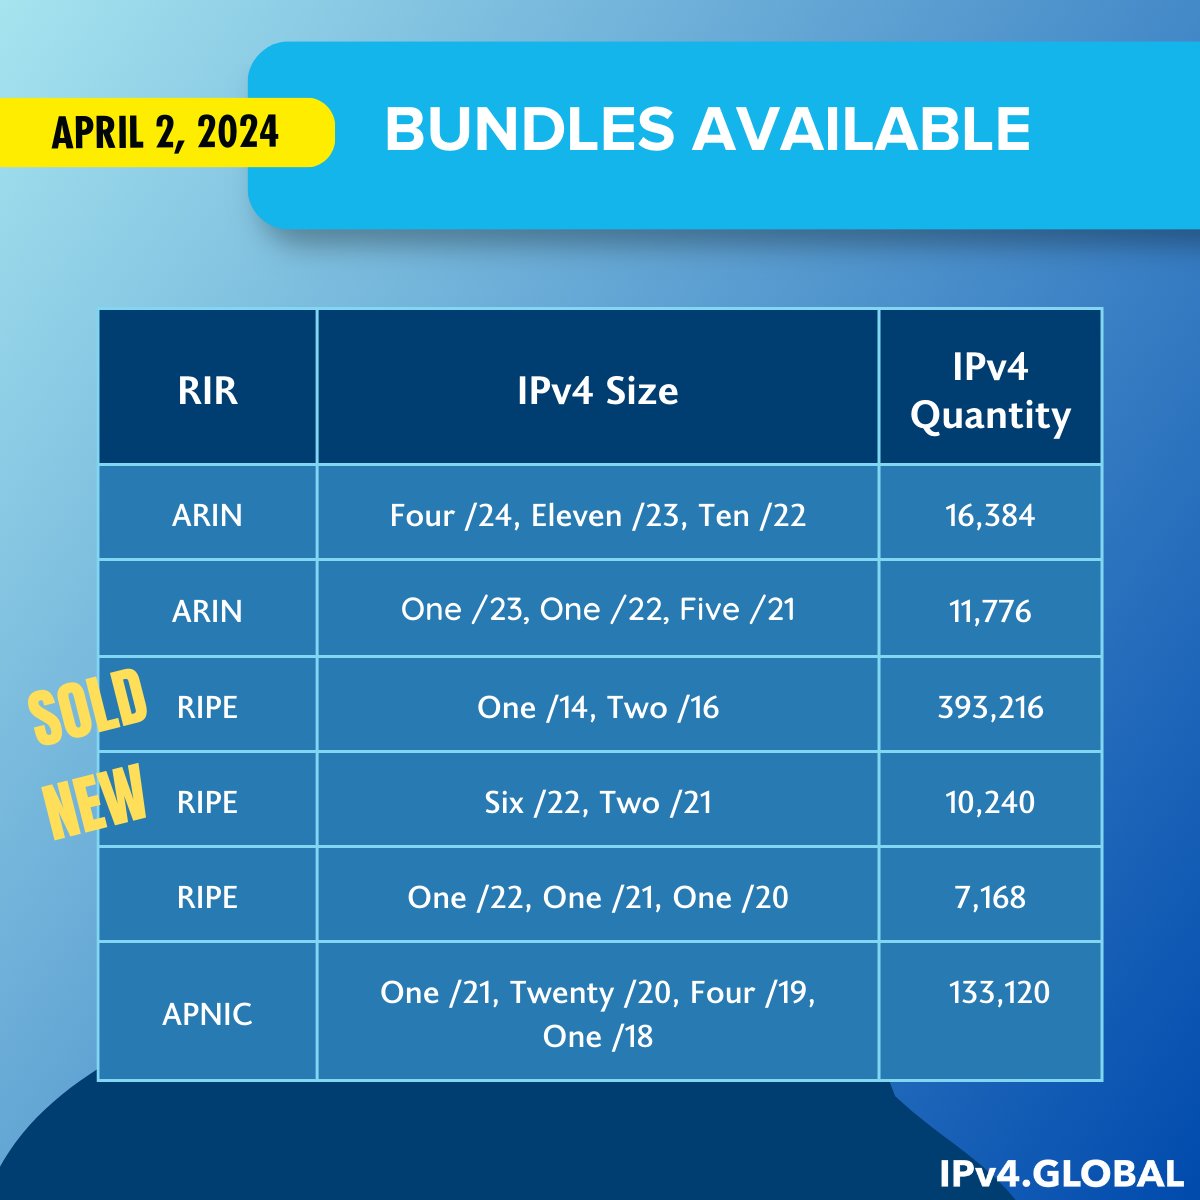 We “bundle” #IPv4 address blocks into larger units so transactions can be simplified. To save time and money, each package is from the same seller. Visit our packages page at hubs.li/Q02rvzXh0 or contact Makenzie Thompson at mthompson@hilcoglobal.com.